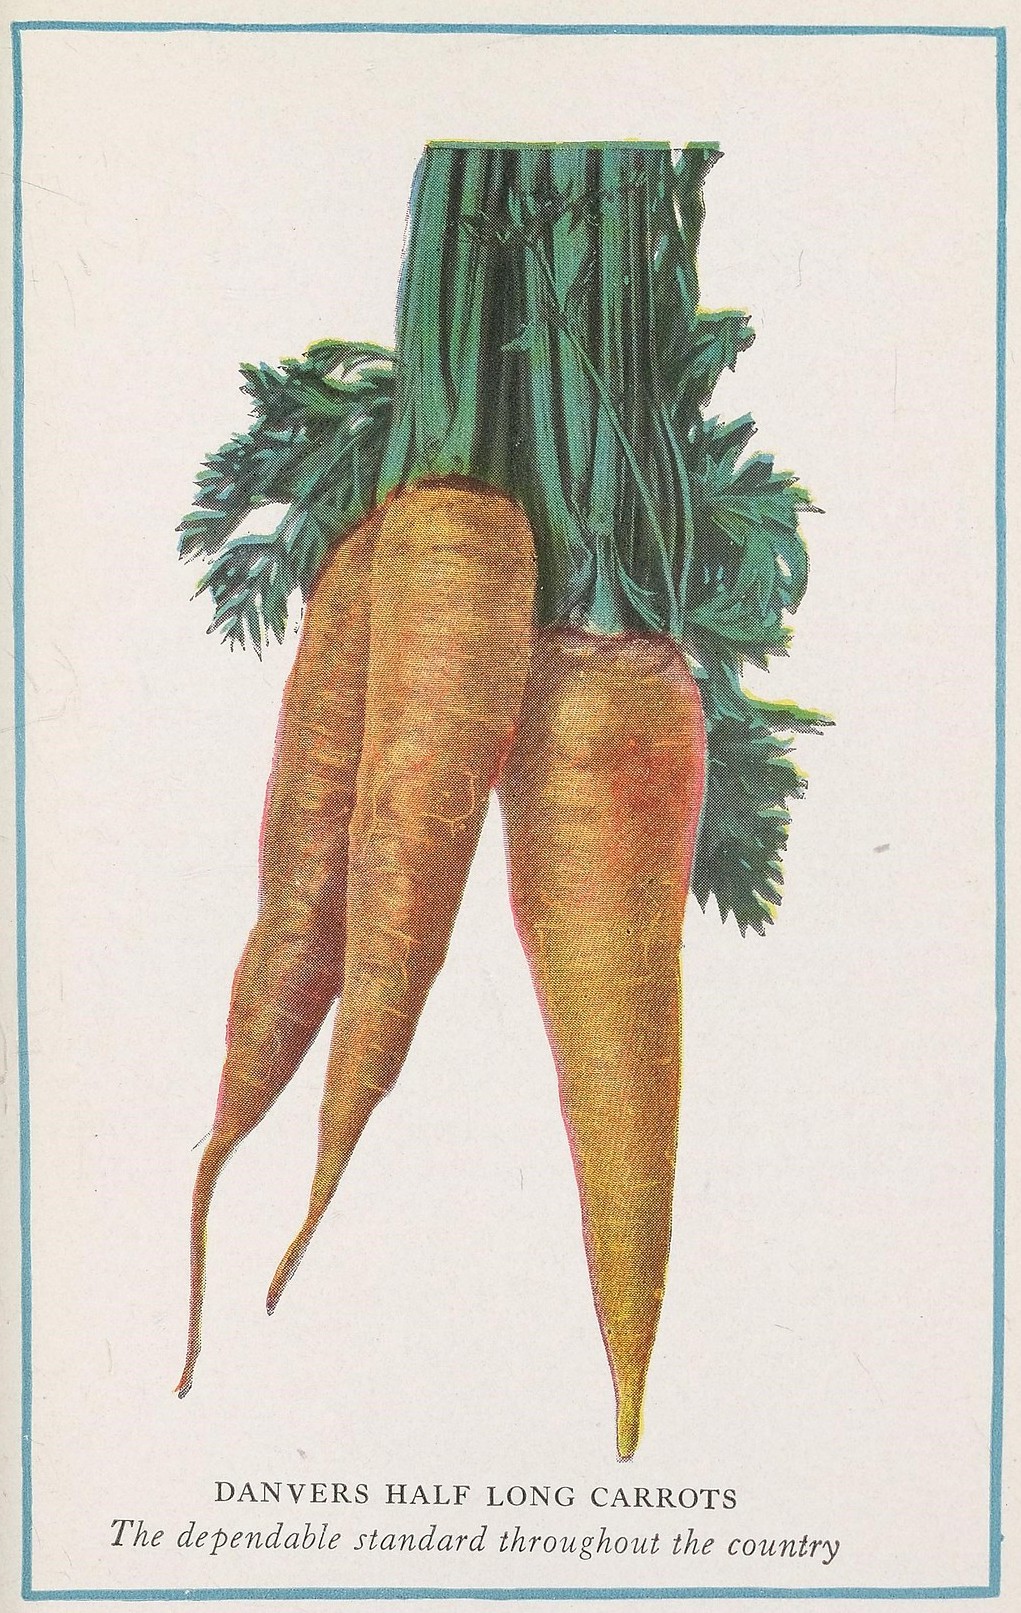 File:Danvers Half Long Carrots (Home vegetable gardening from A to Z).jpg